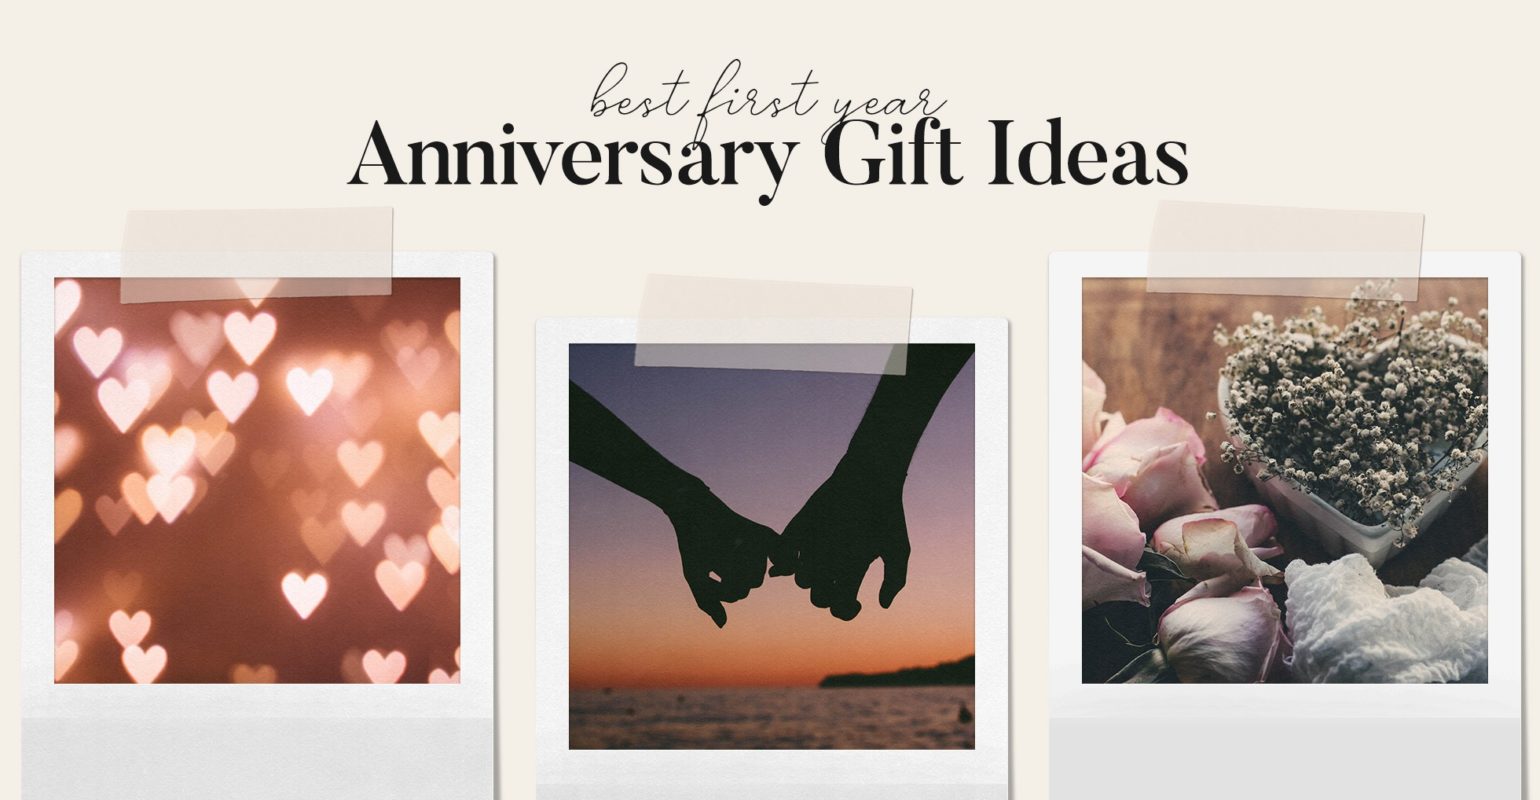 7 Best Gift Ideas for 1st Year Anniversary That Are Unique and Personal